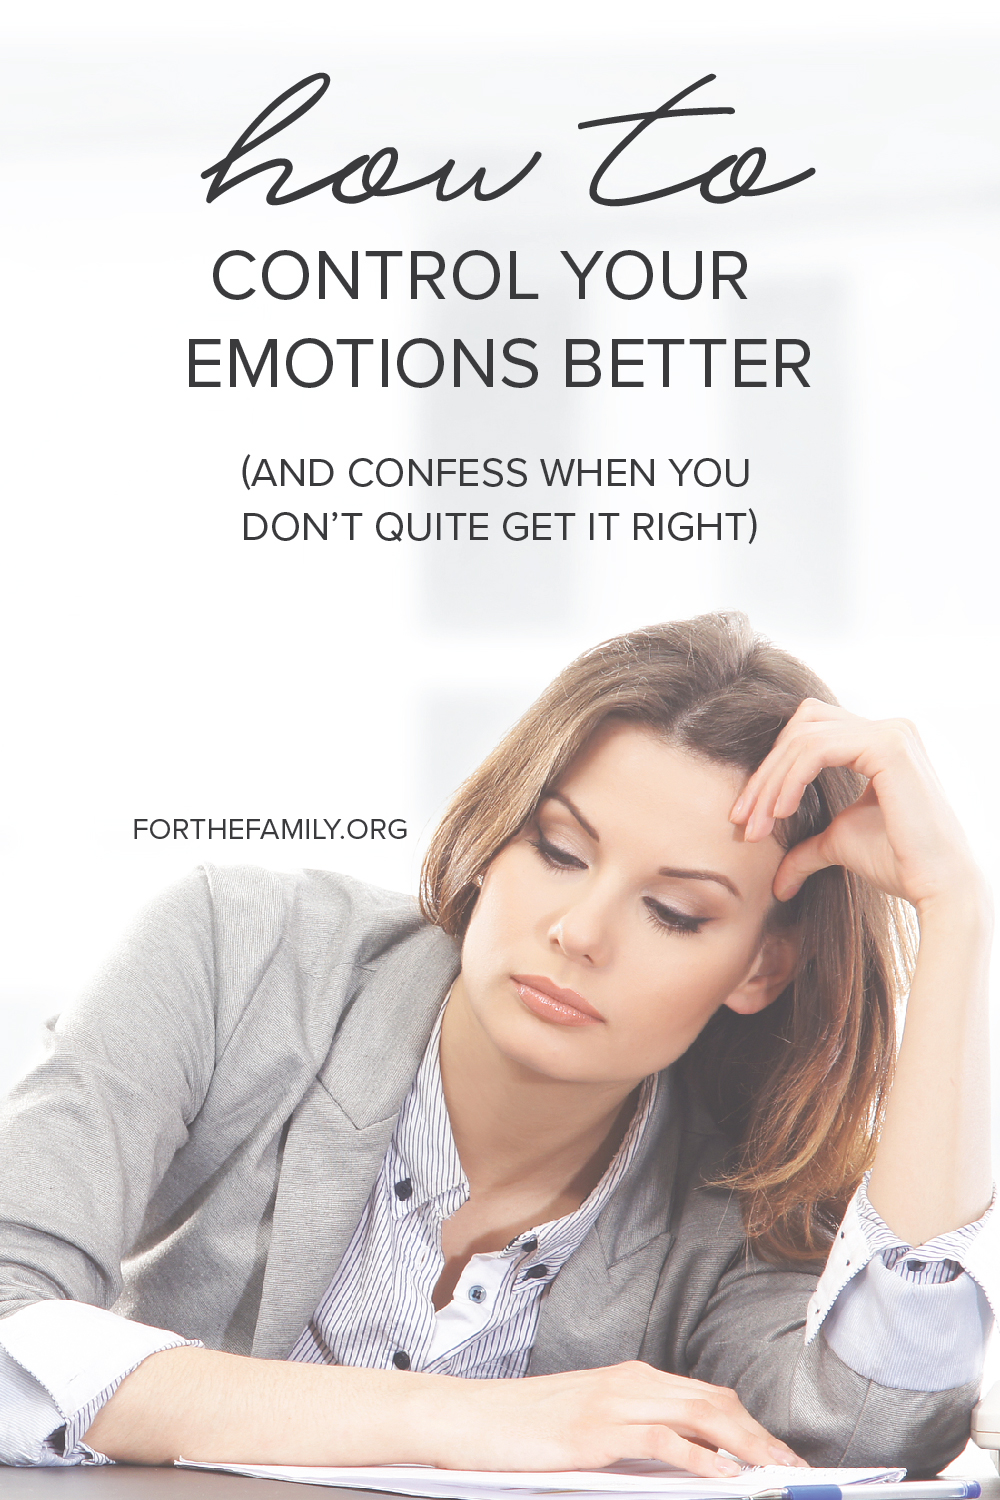 How to Control Your Emotions Better (and Confess When You Don’t Quite Get It Right)